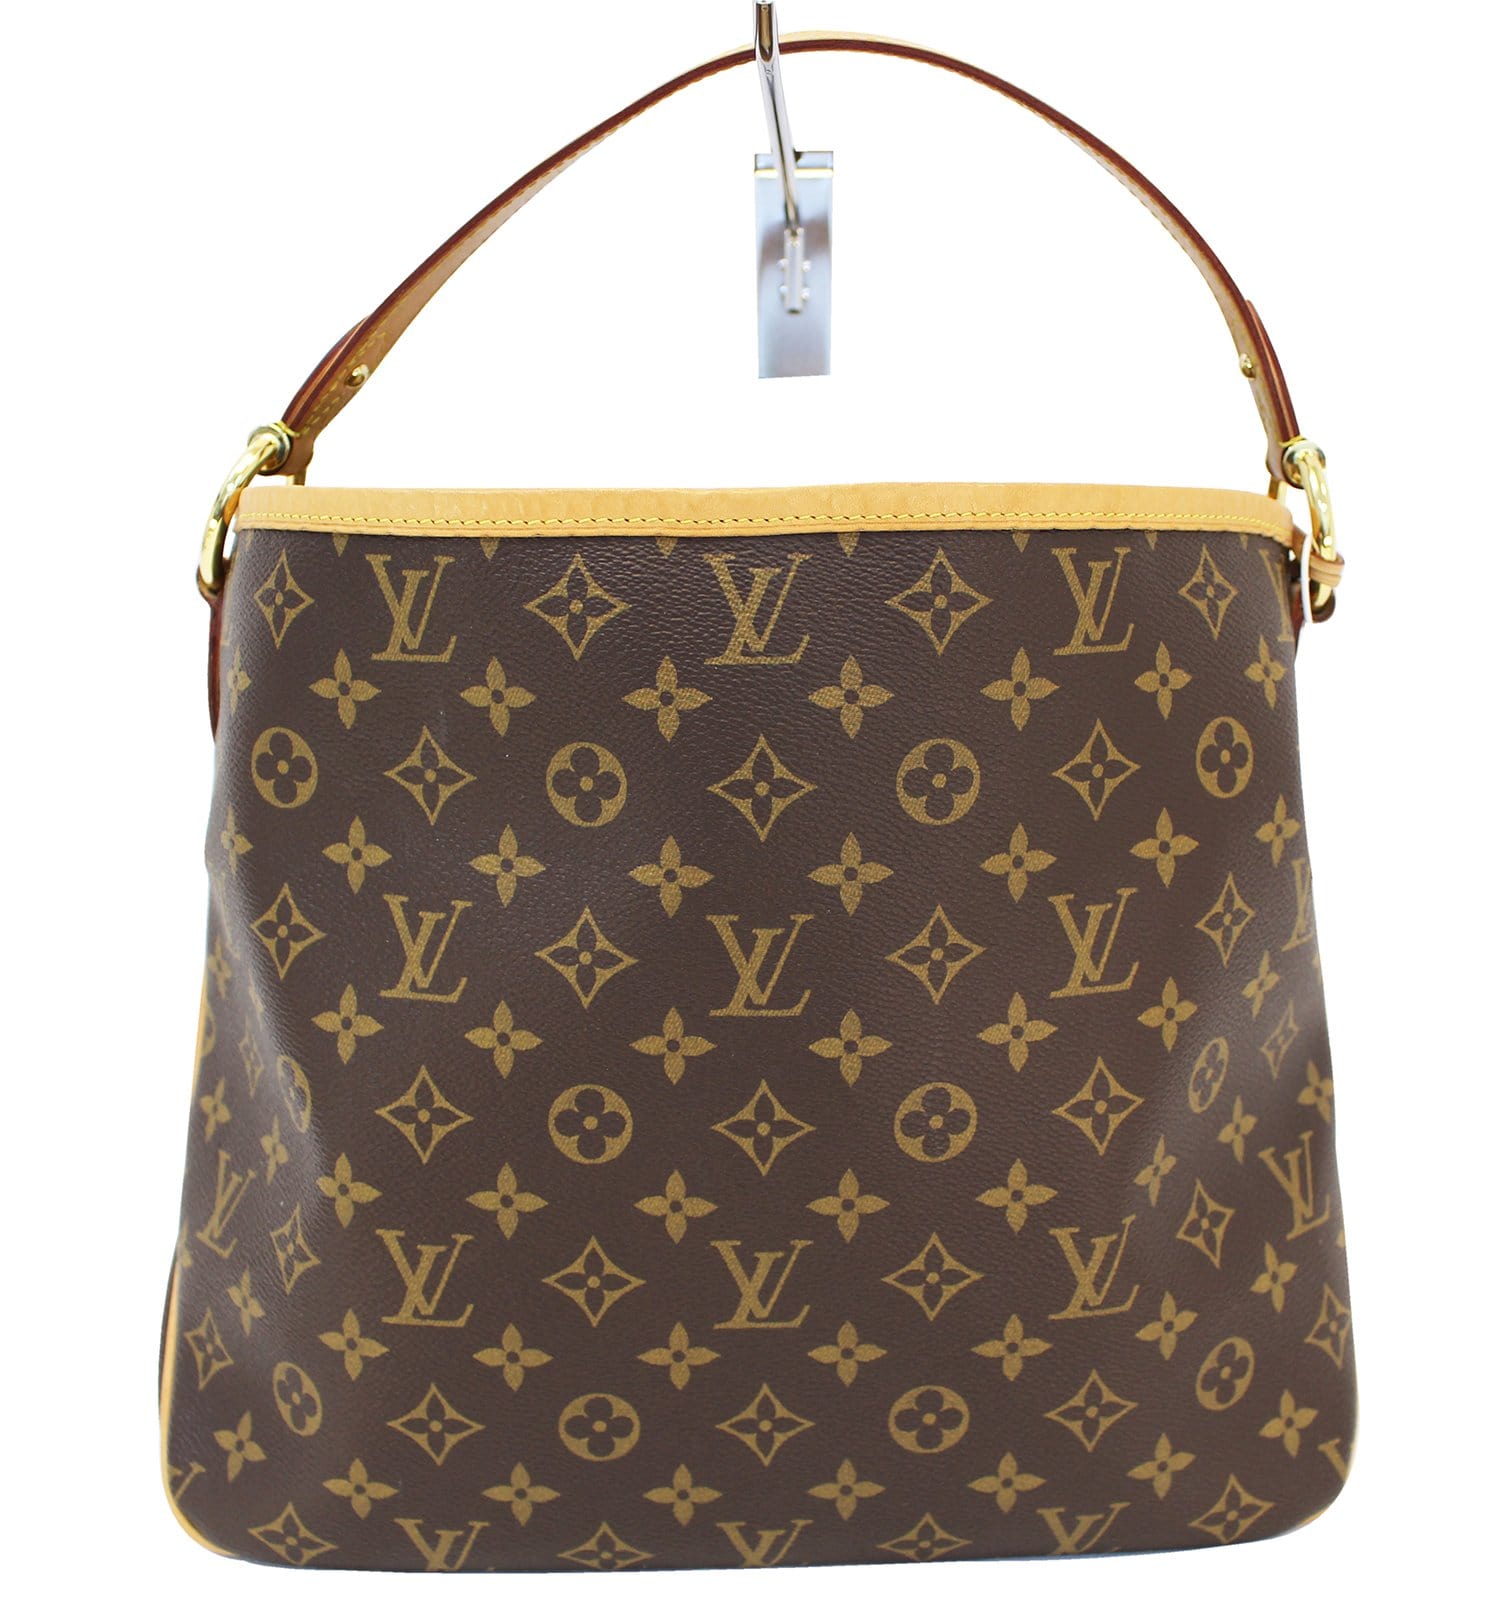 Louis Vuitton - Enjoy the delightful and sunny feeling of the